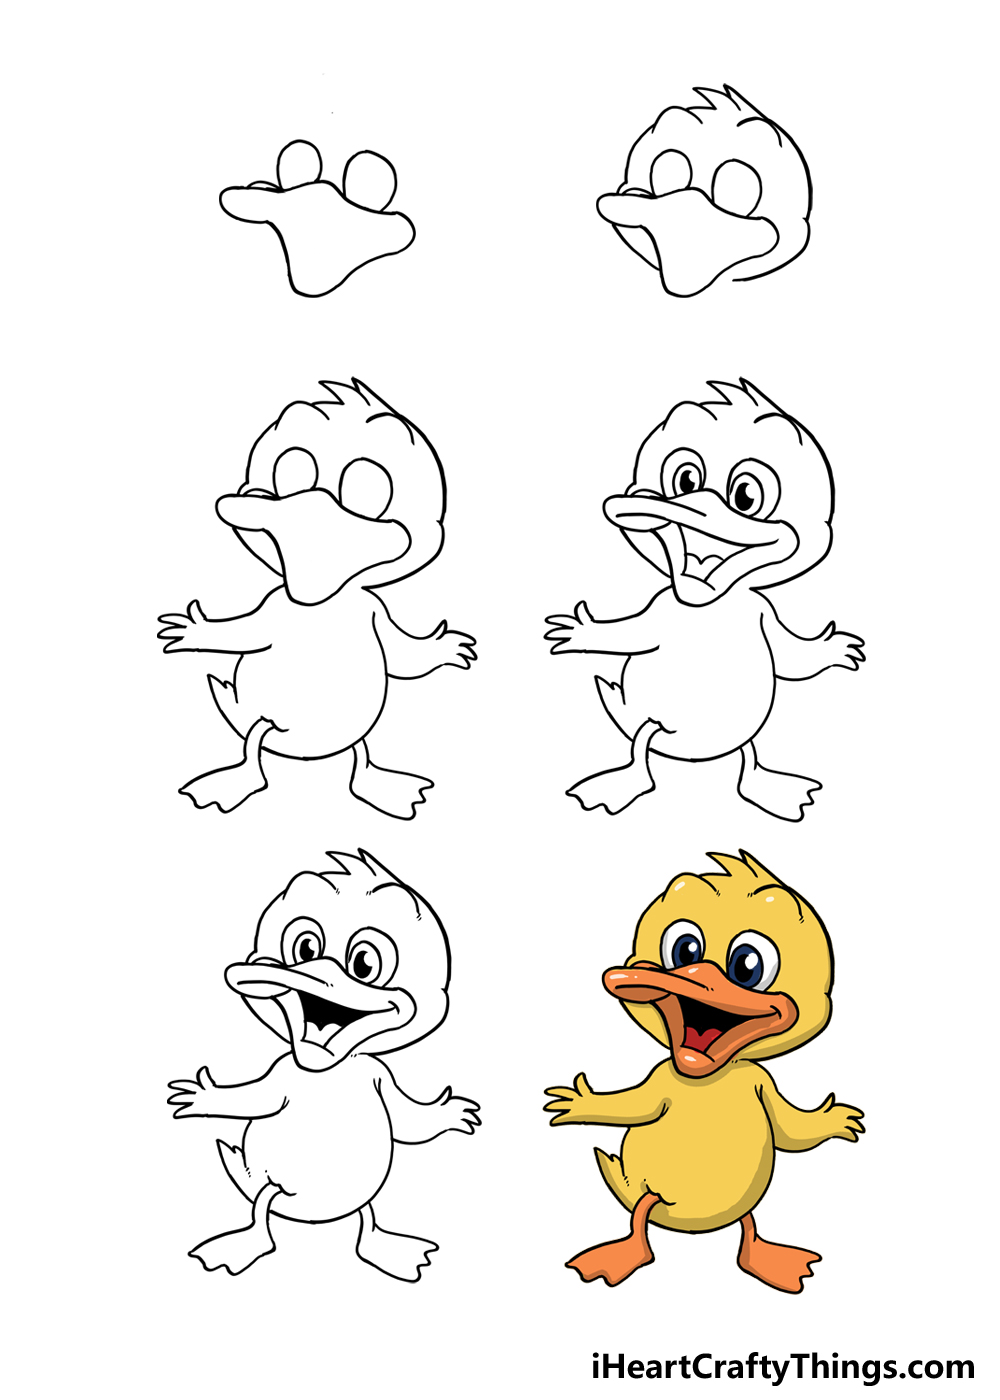 How to Draw a Duck - An Easy Duck Drawing Tutorial for All Artists